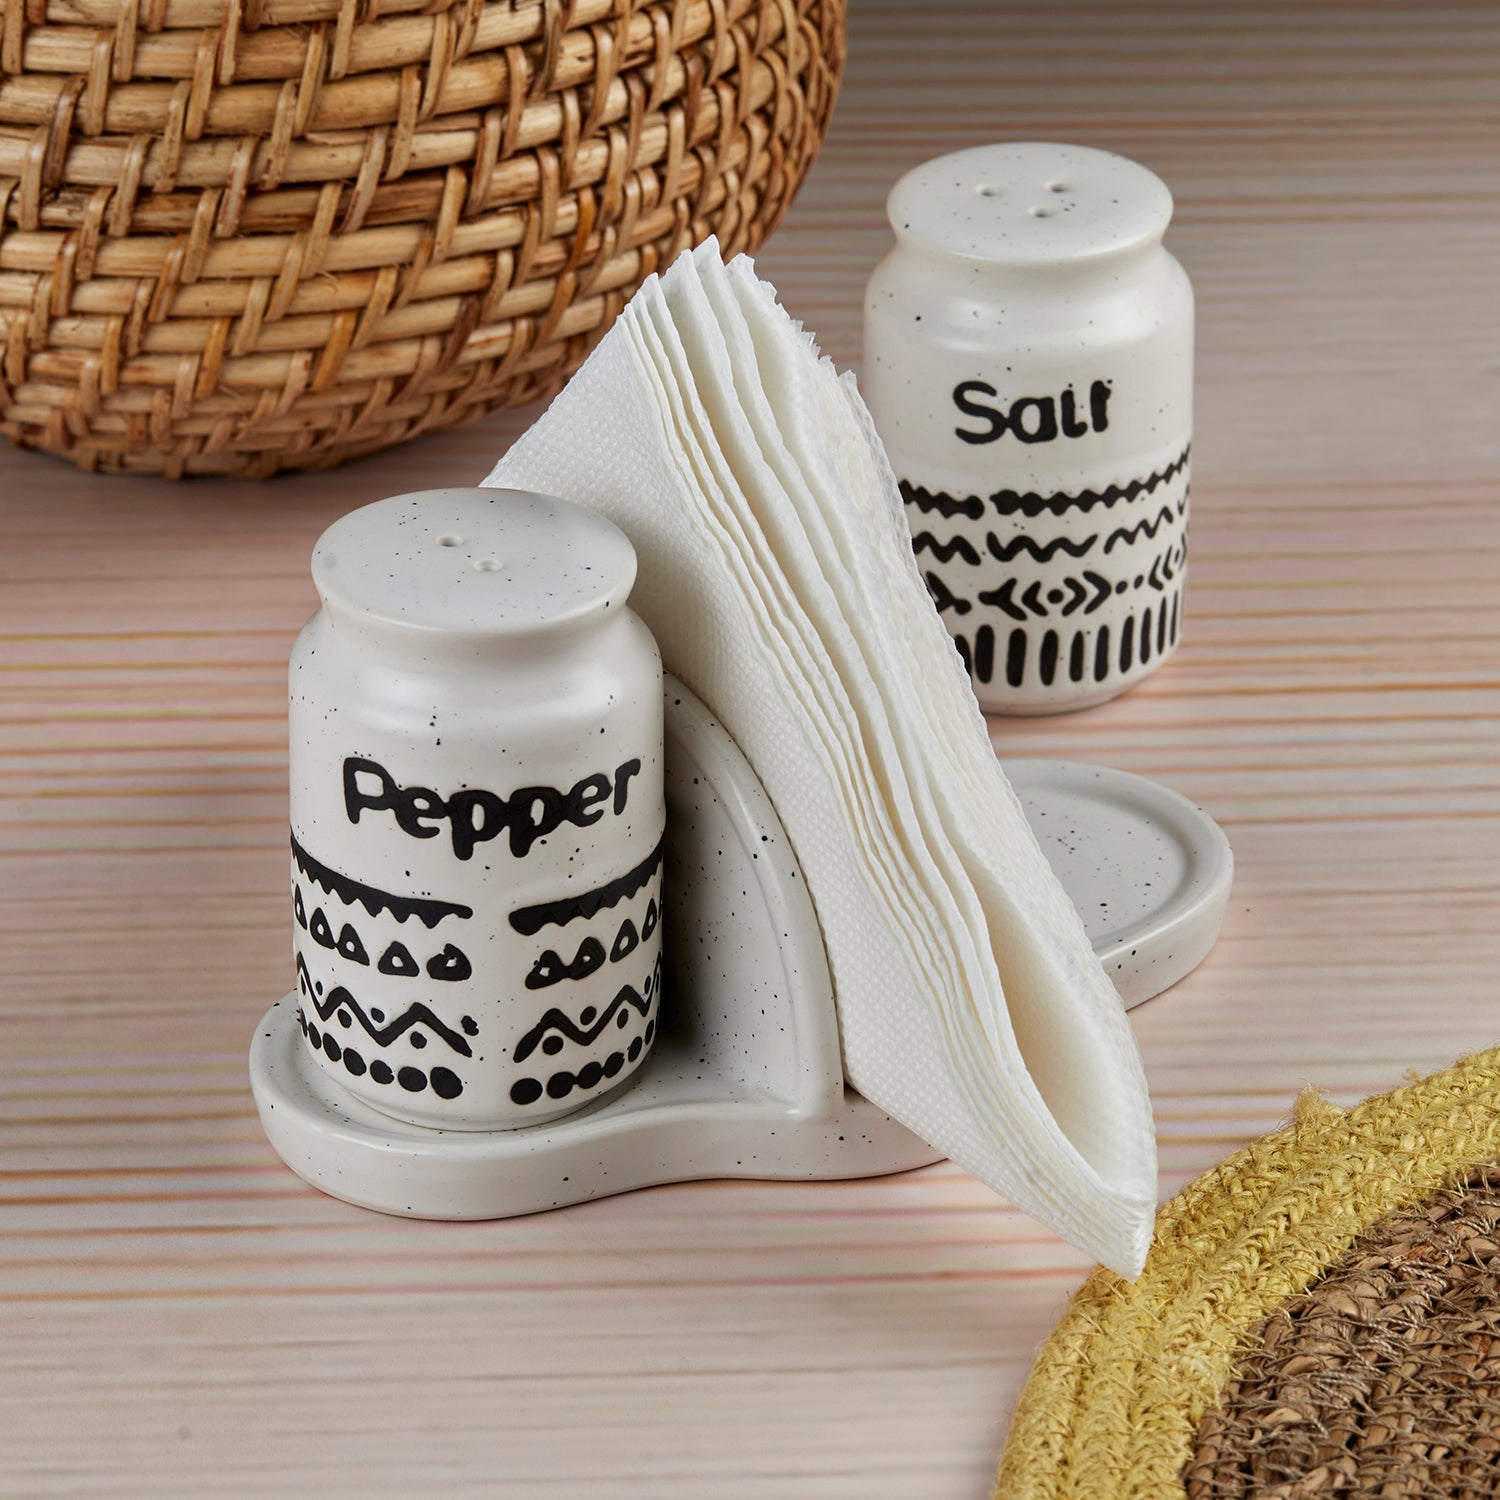 Ceramic Salt and Pepper Shakers Set with tray for Dining Table (10713)